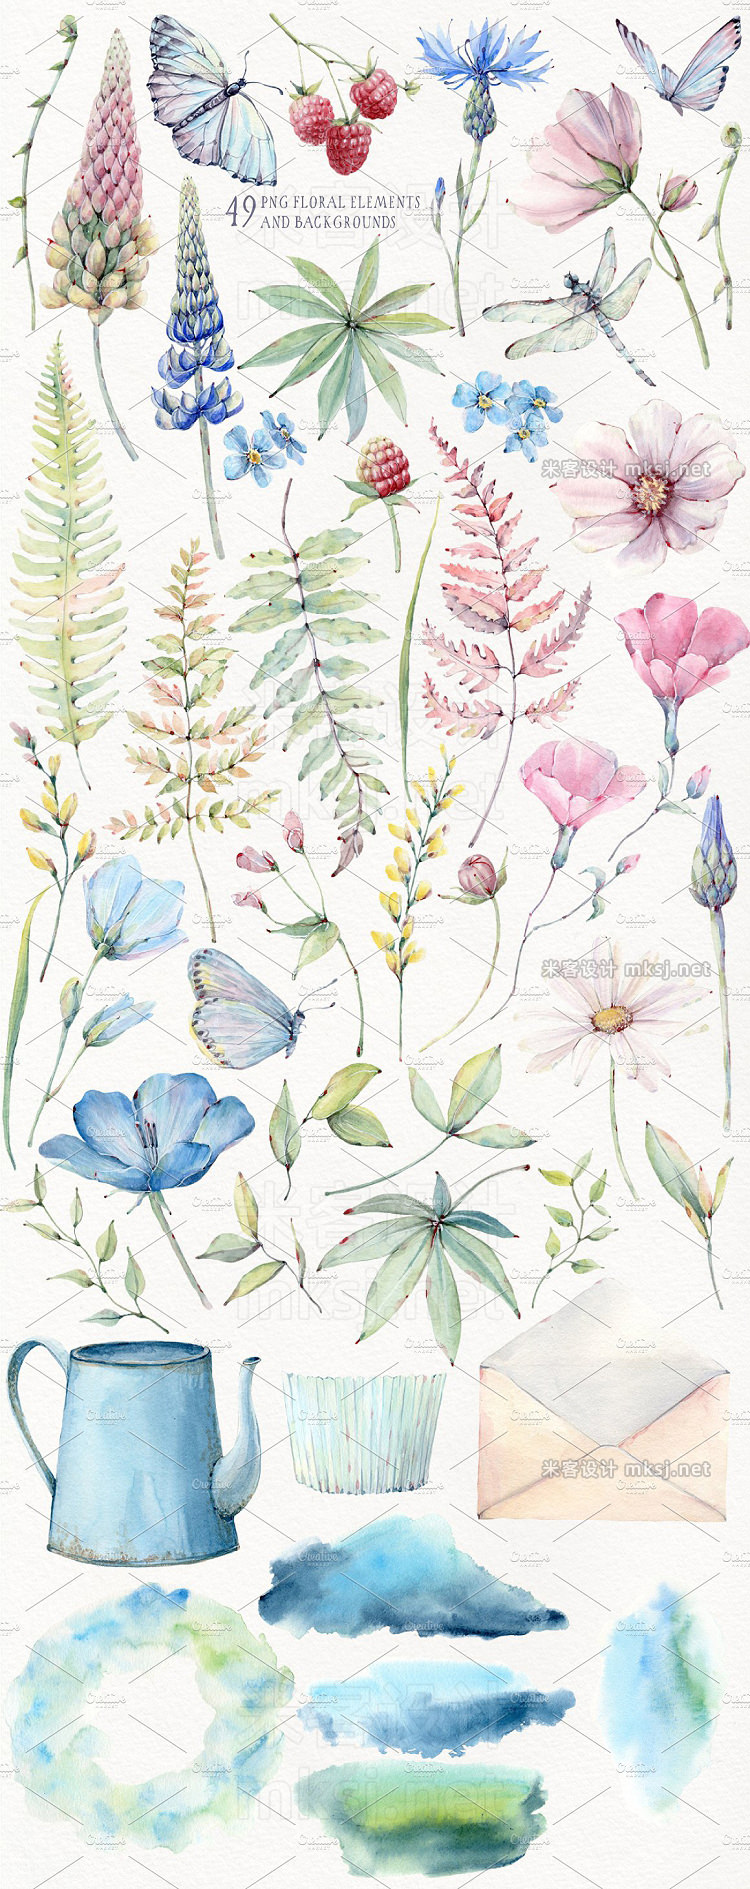 png素材 COUNTRY MORNING Watercolor set